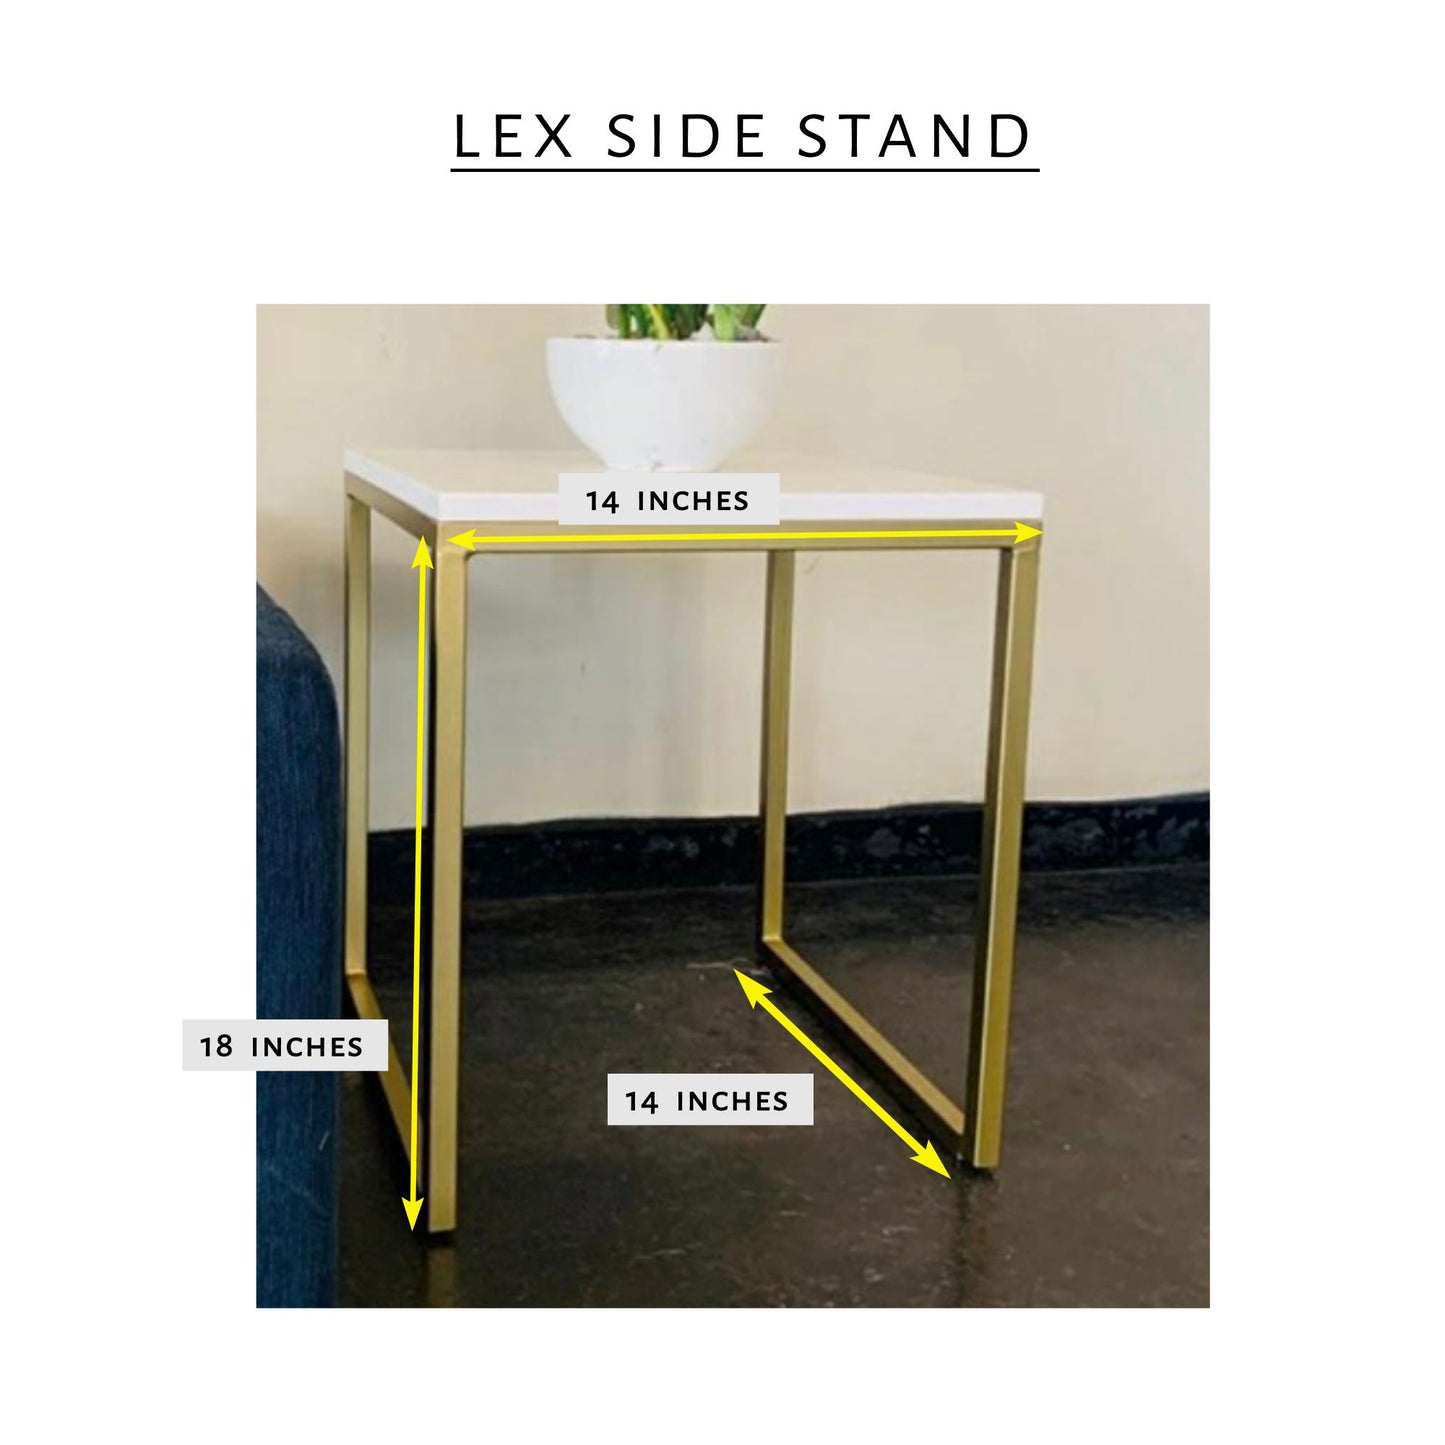 Lex side stand